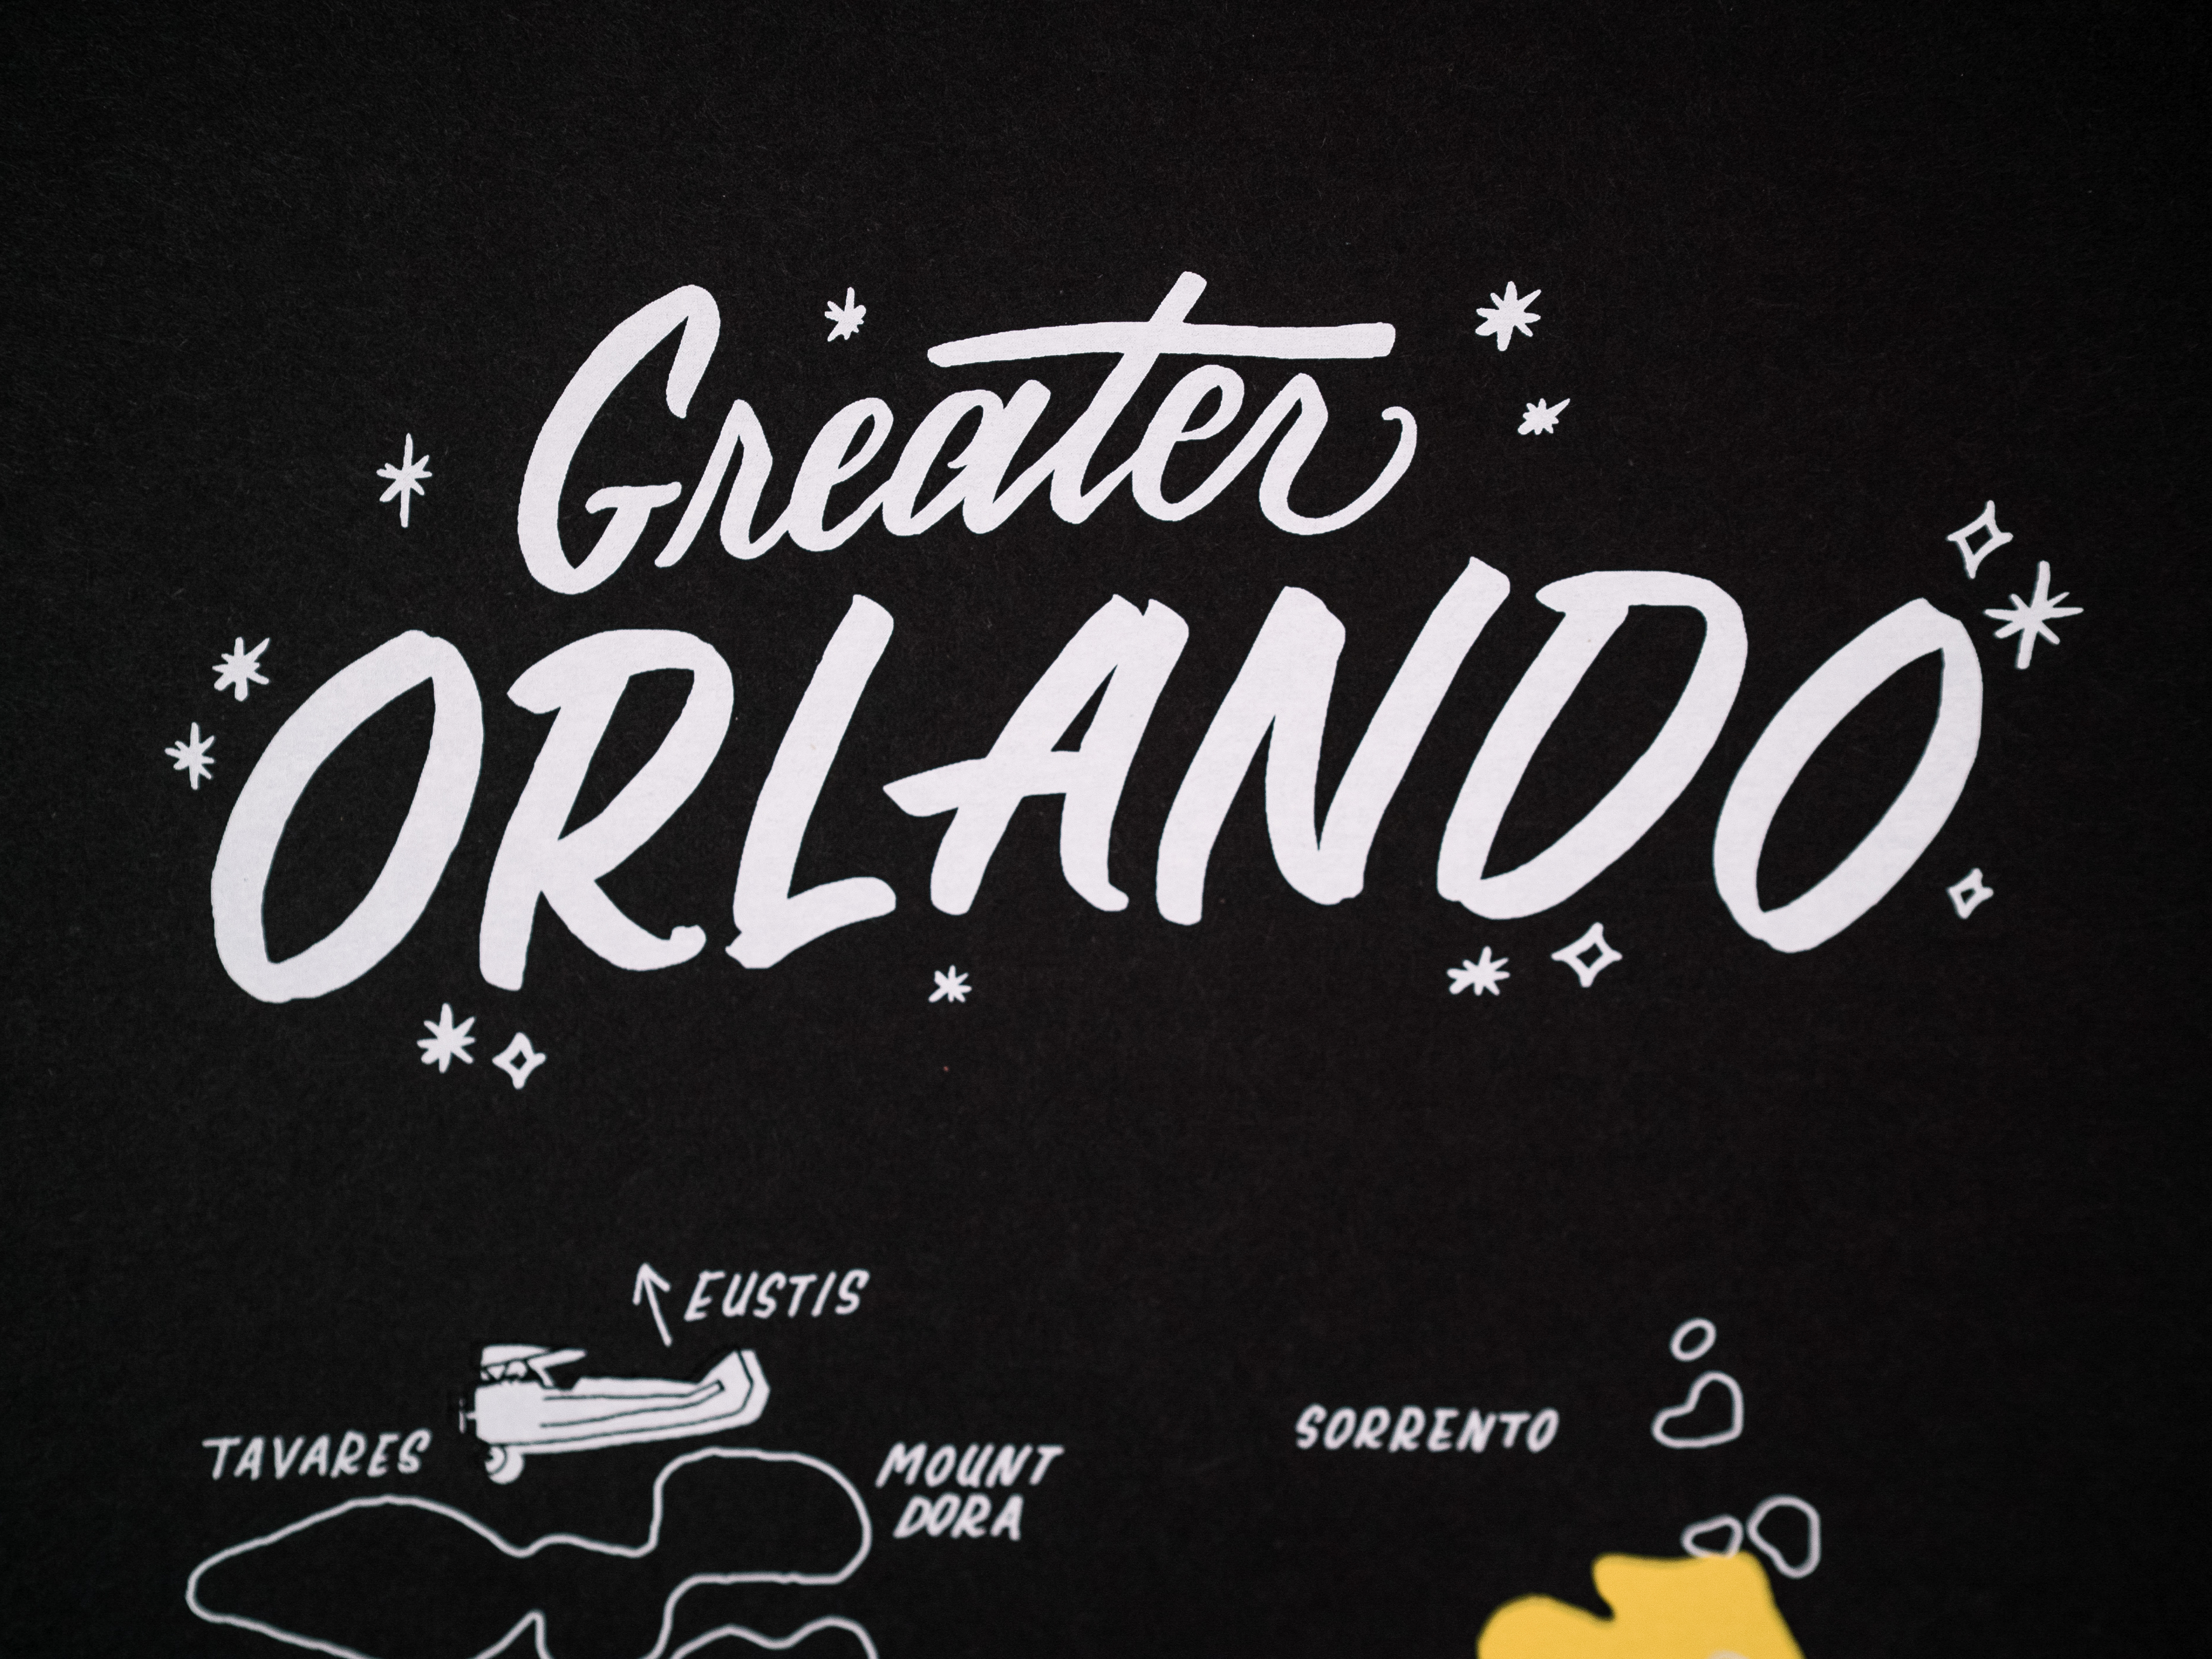 Greater Orlando hand lettering map poster by Hillery Powers (Disney, Winter Park, UCF, Lake Nona, Altamonte Springs)